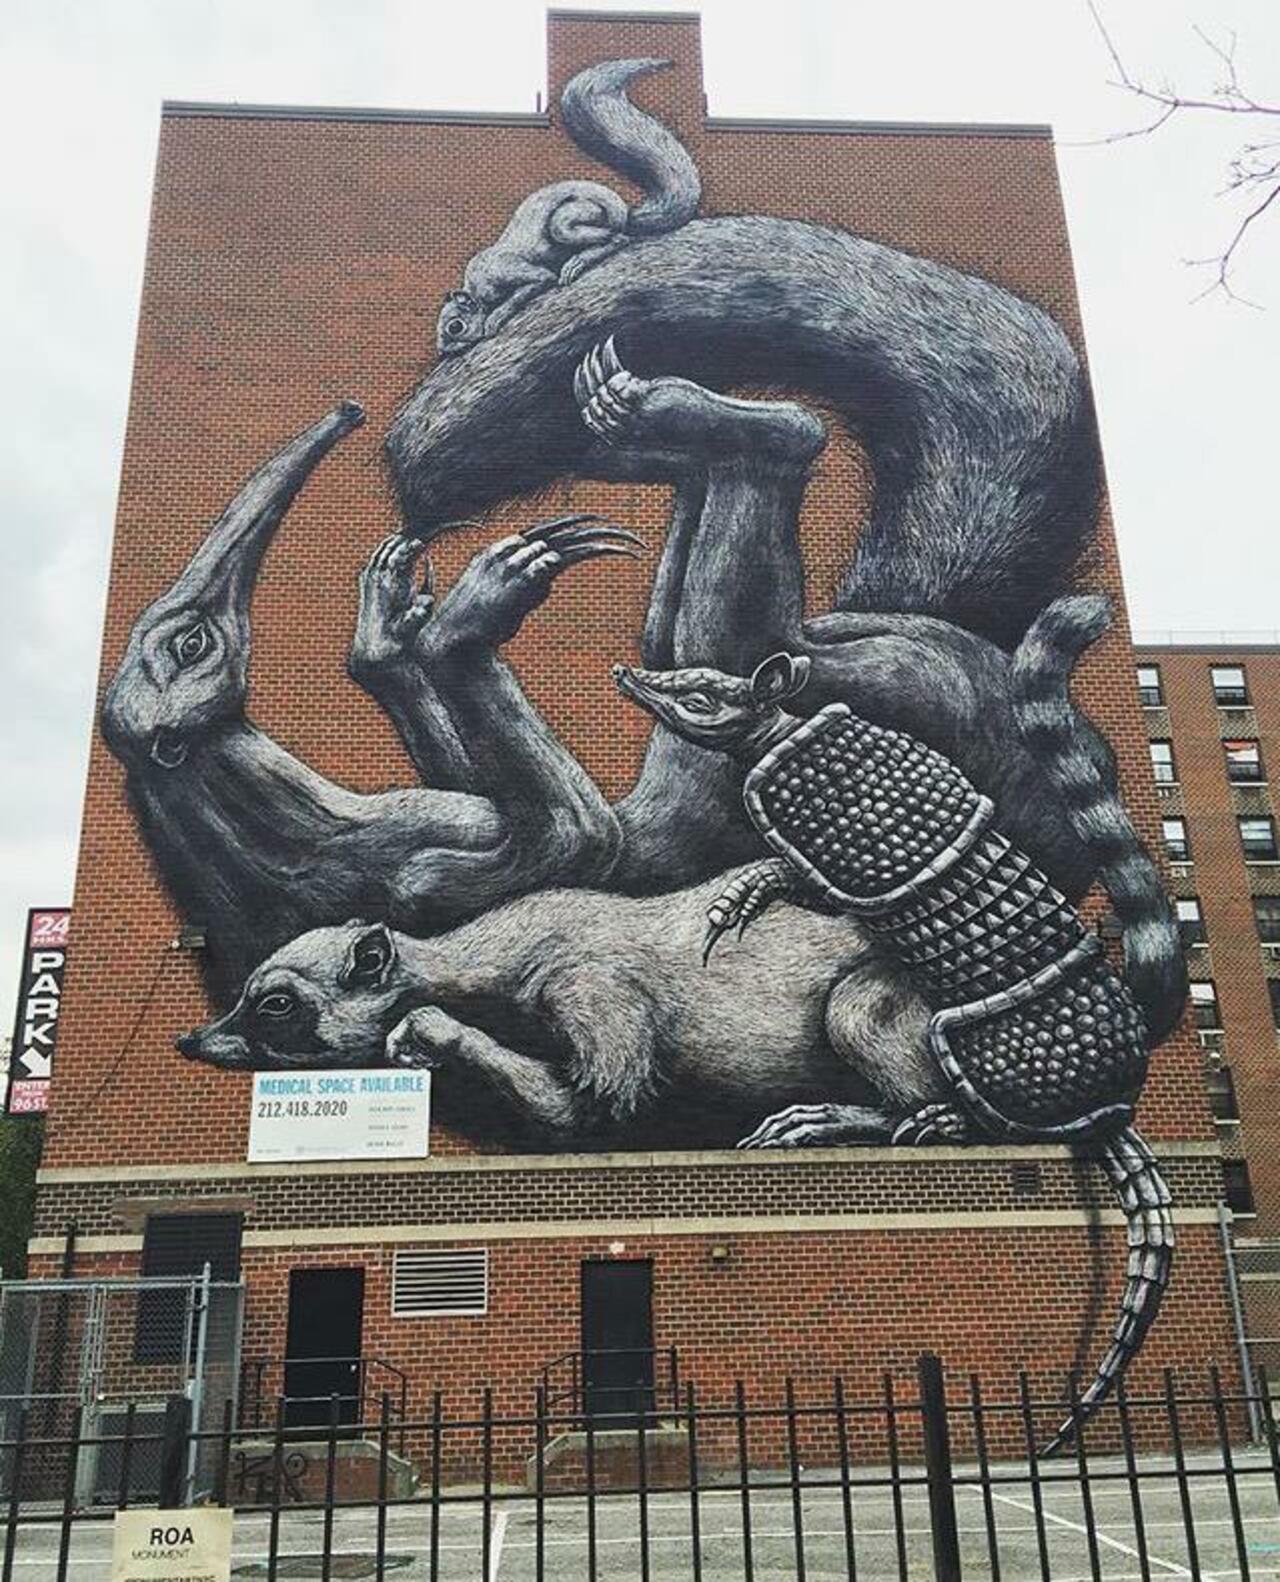 The completed new large scale Street Art wall by ROA in NYC

#art #graffiti #mural #streetart http://t.co/ztjoPZzZlO